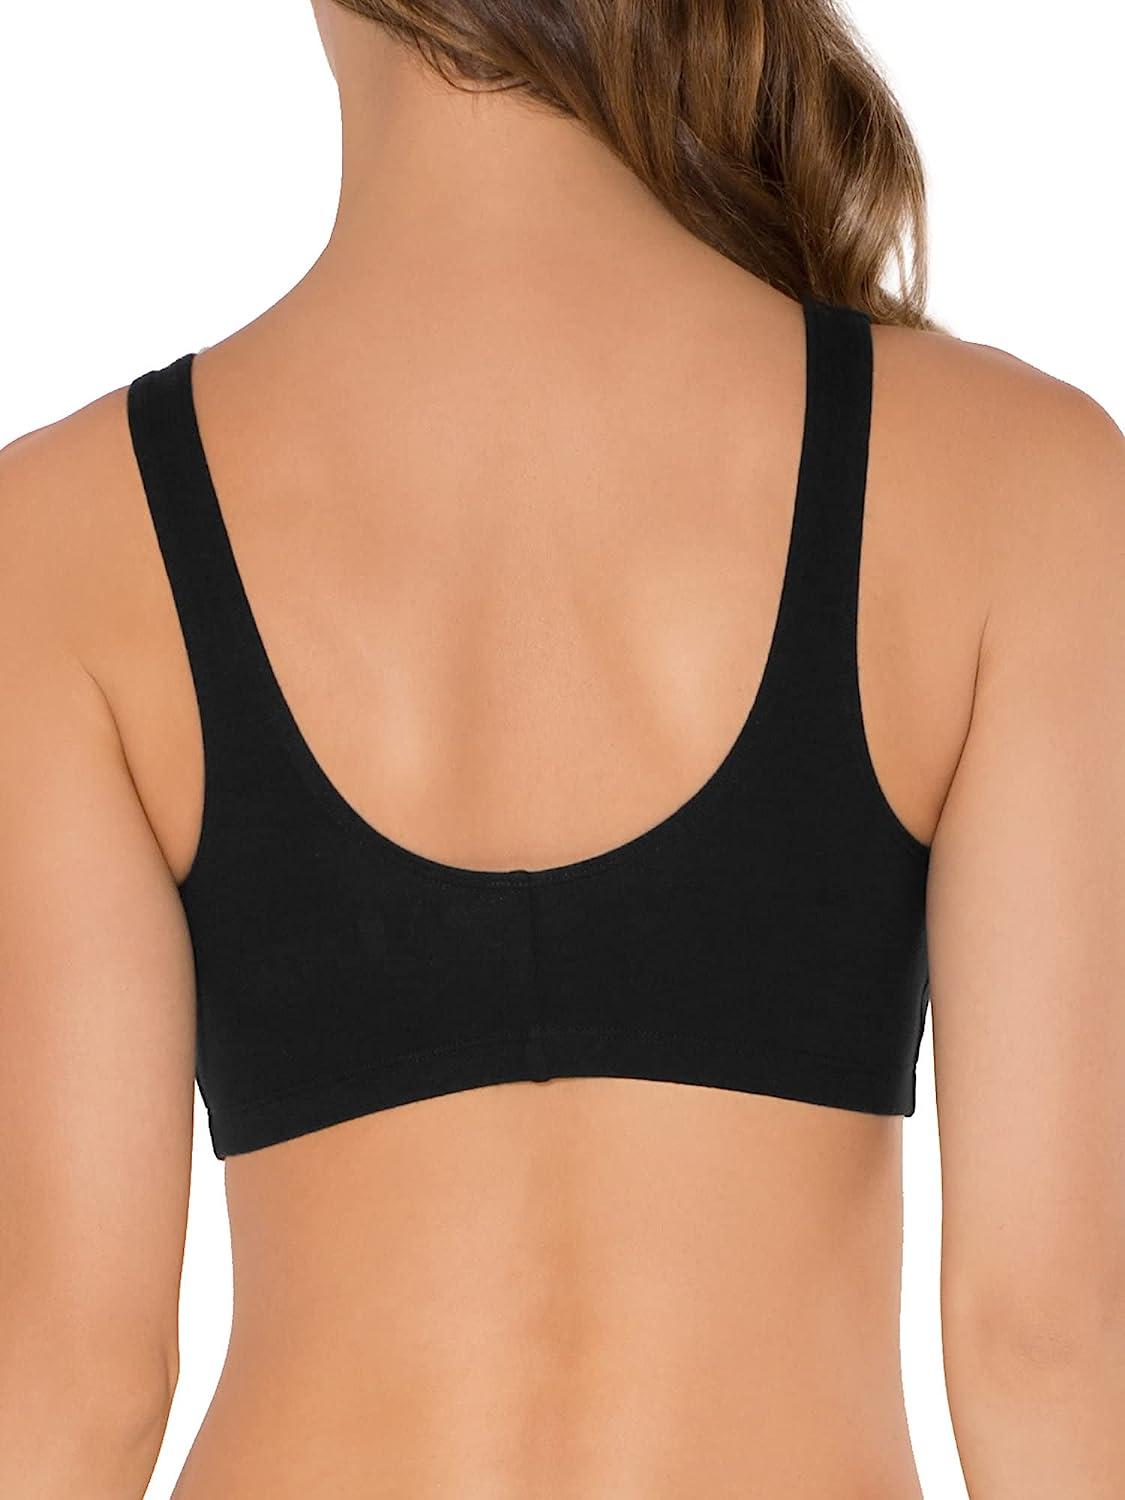 Back Closure Cotton Girls Sports Bras for Young Stutents